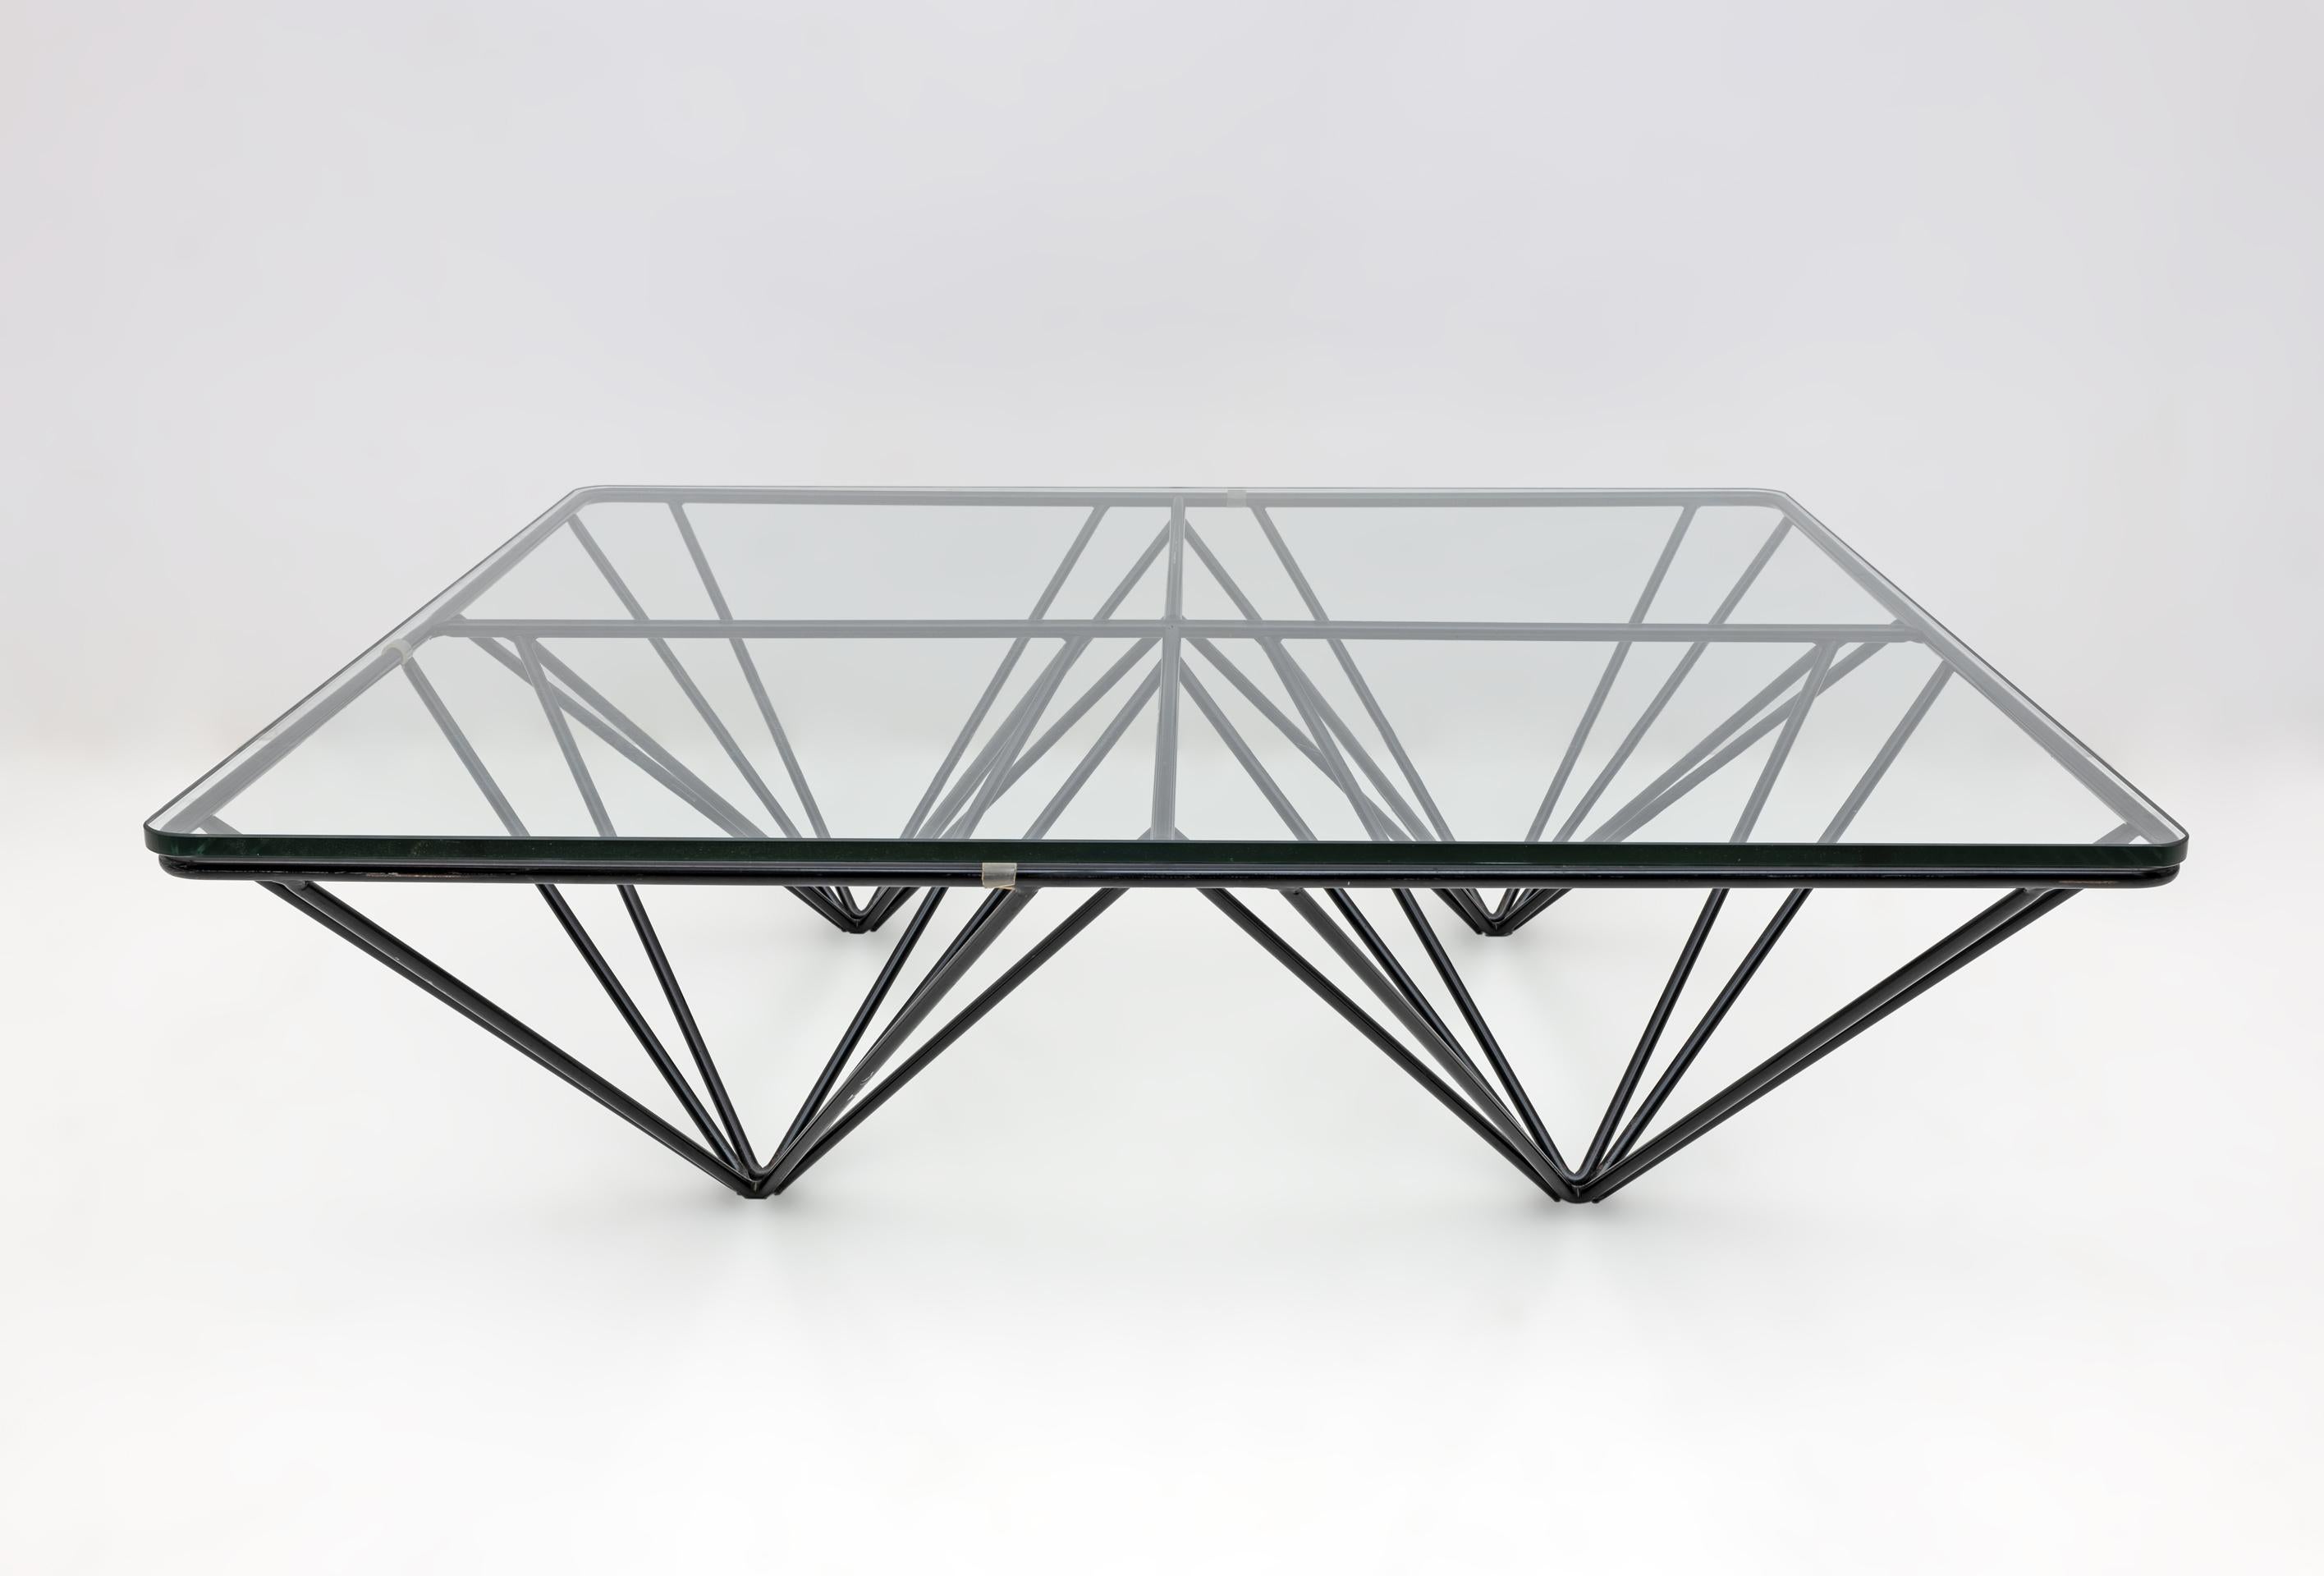 Steel Alanda Square Coffee Table by Paolo Piva for B&B Italia, 1980s For Sale